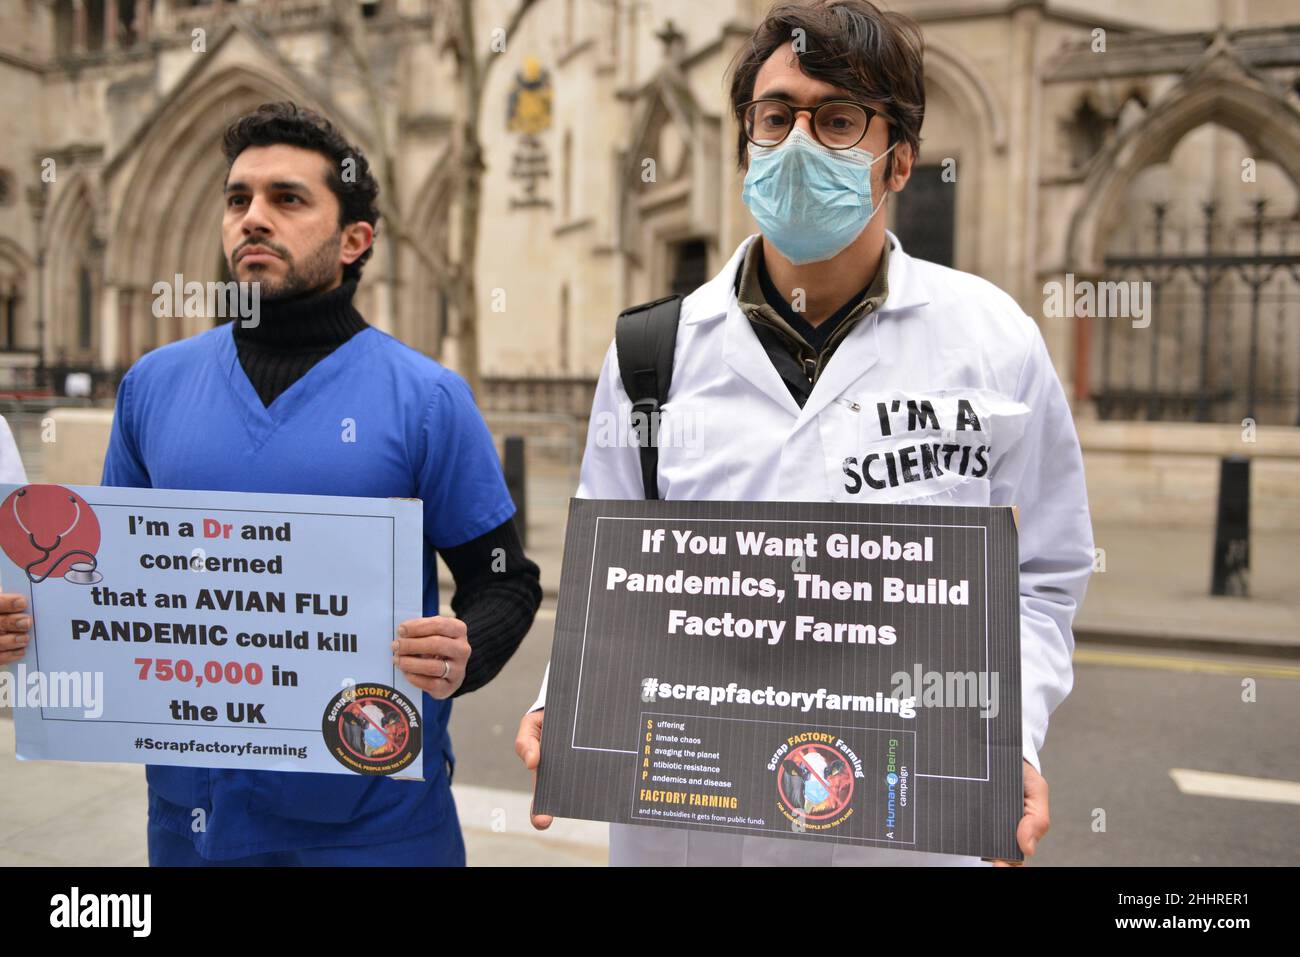 Activists hold placards warning of the dangers of antibiotic resistance, avian flu and swine flu pandemics, during the protest.Animal rights activists gathered outside the Royal Courts of Justice in London in protest against factory farming. (Photo by Thomas Krych / SOPA Images/Sipa USA) Stock Photo